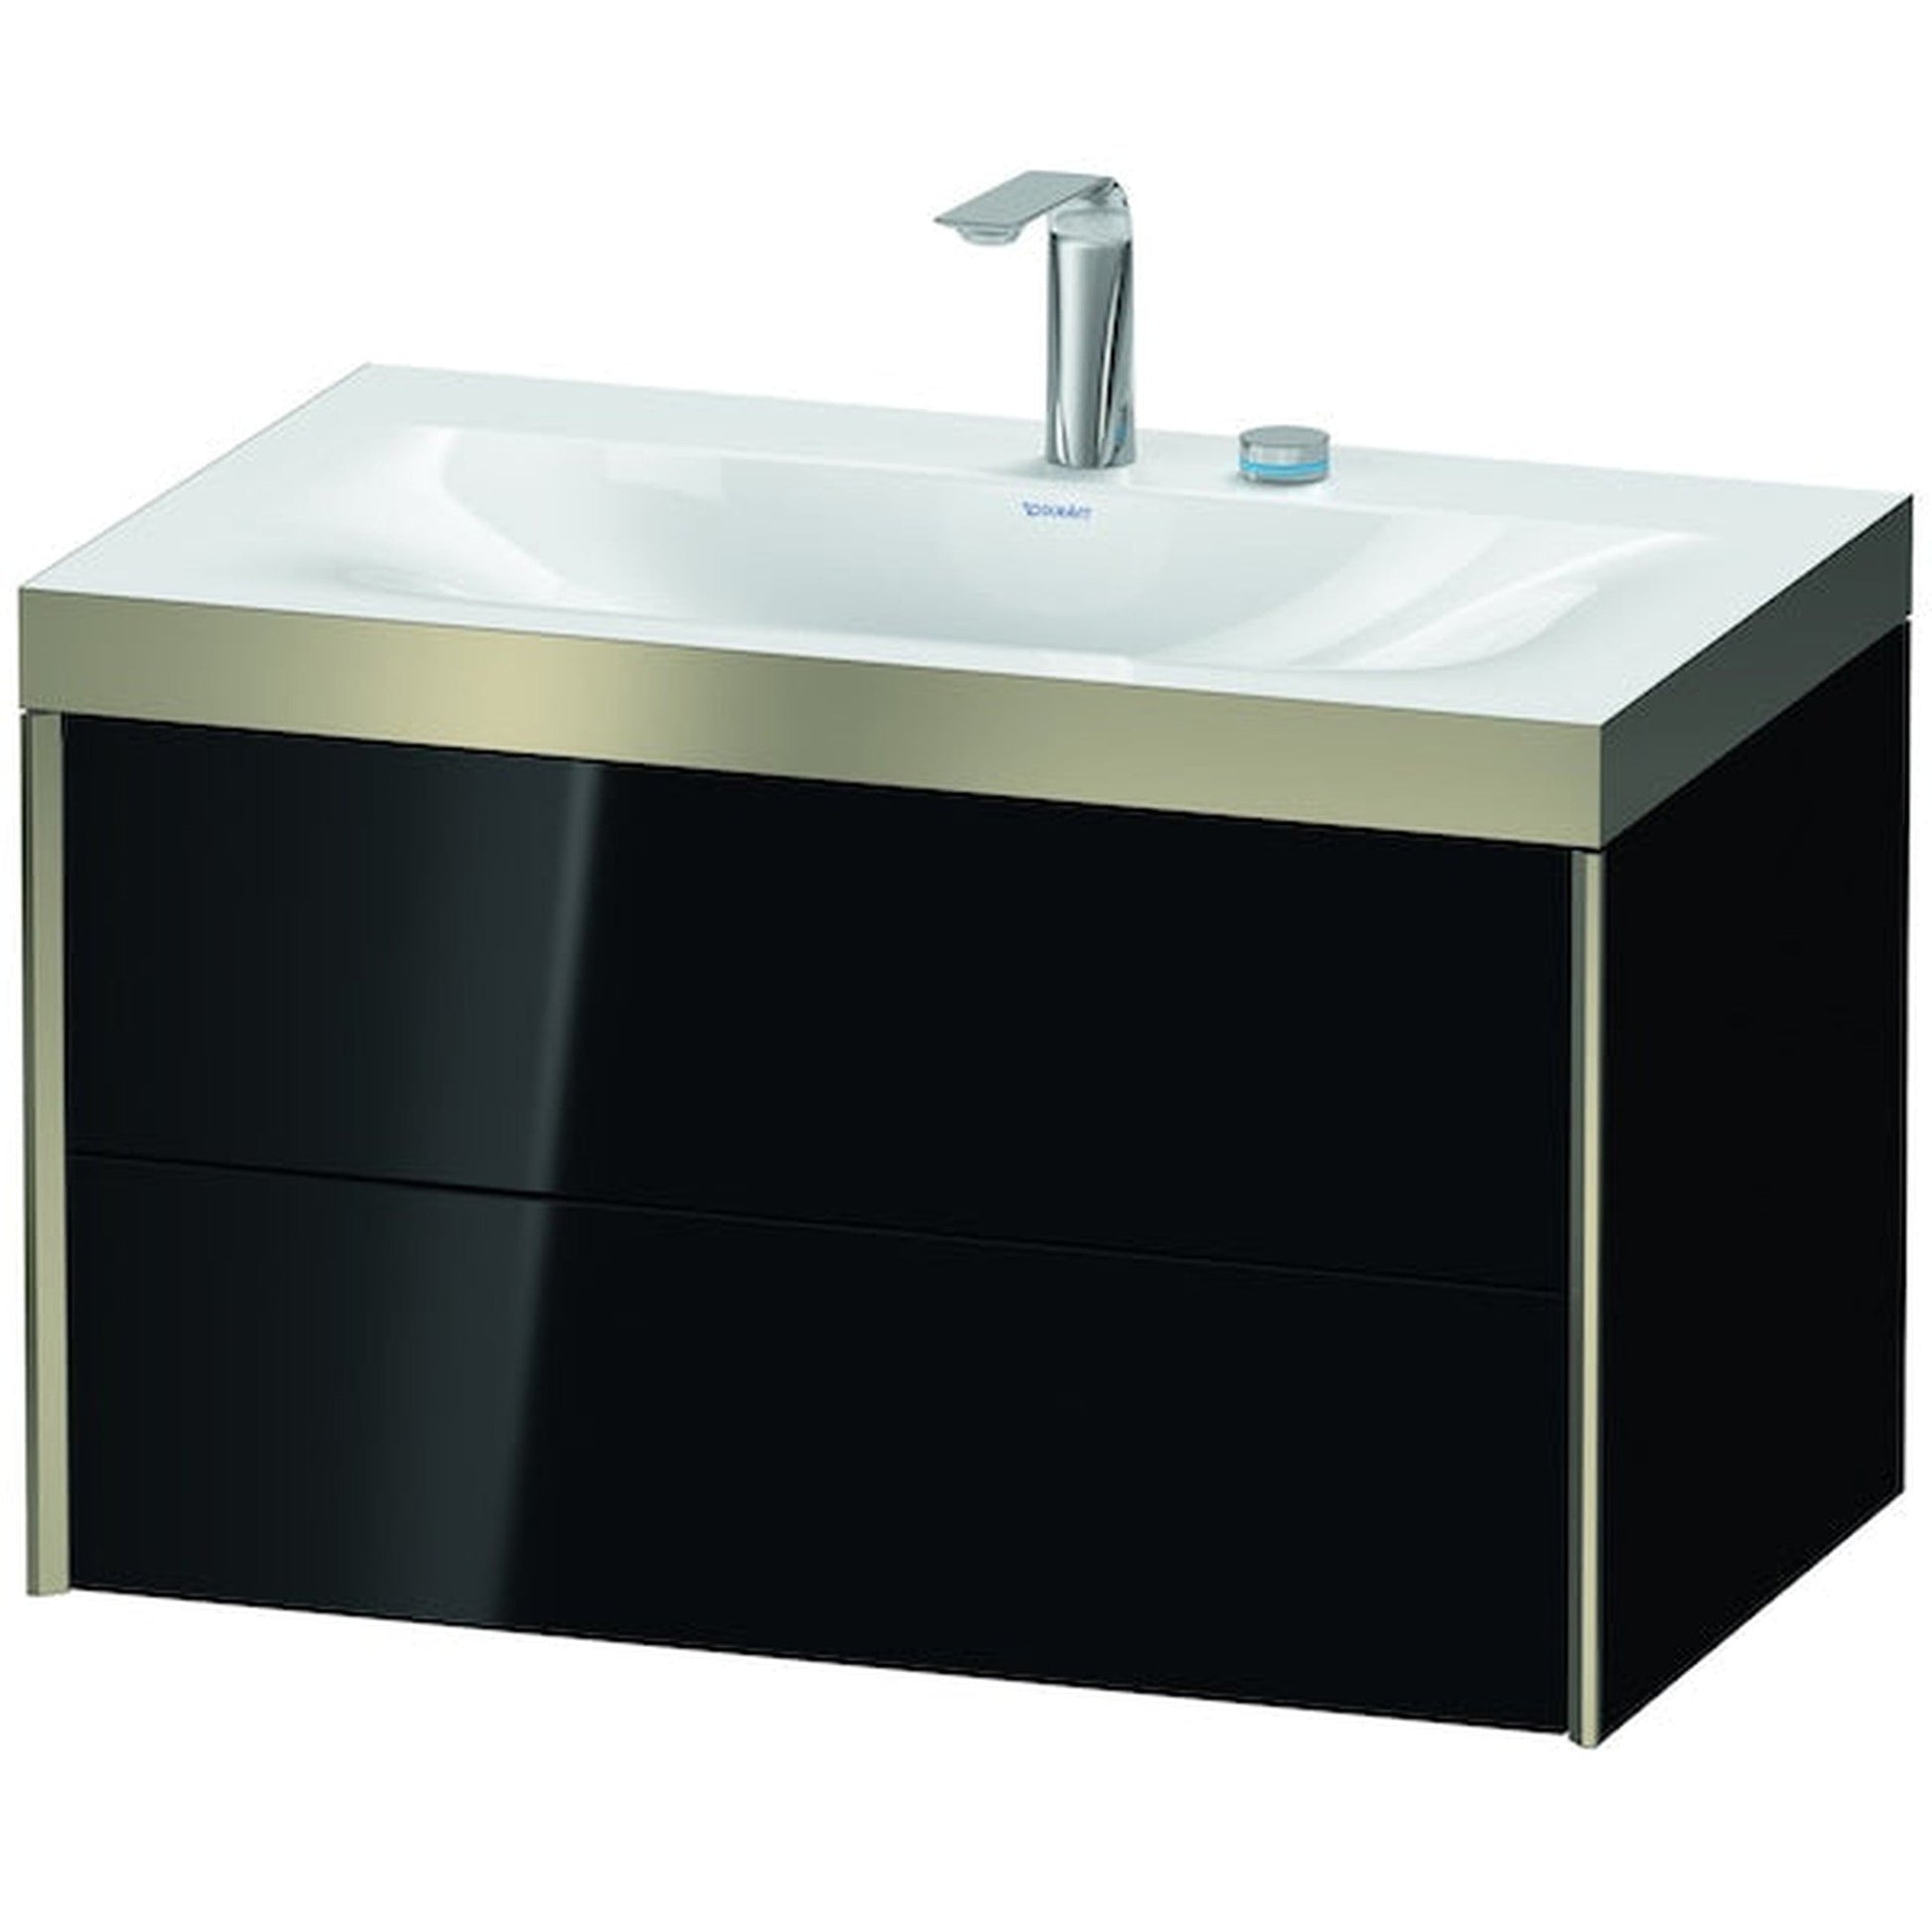 Duravit Xviu 31" x 20" x 19" Two Drawer C-Bonded Wall-Mount Vanity Kit With Two Tap Holes, Black (XV4615EB140P)